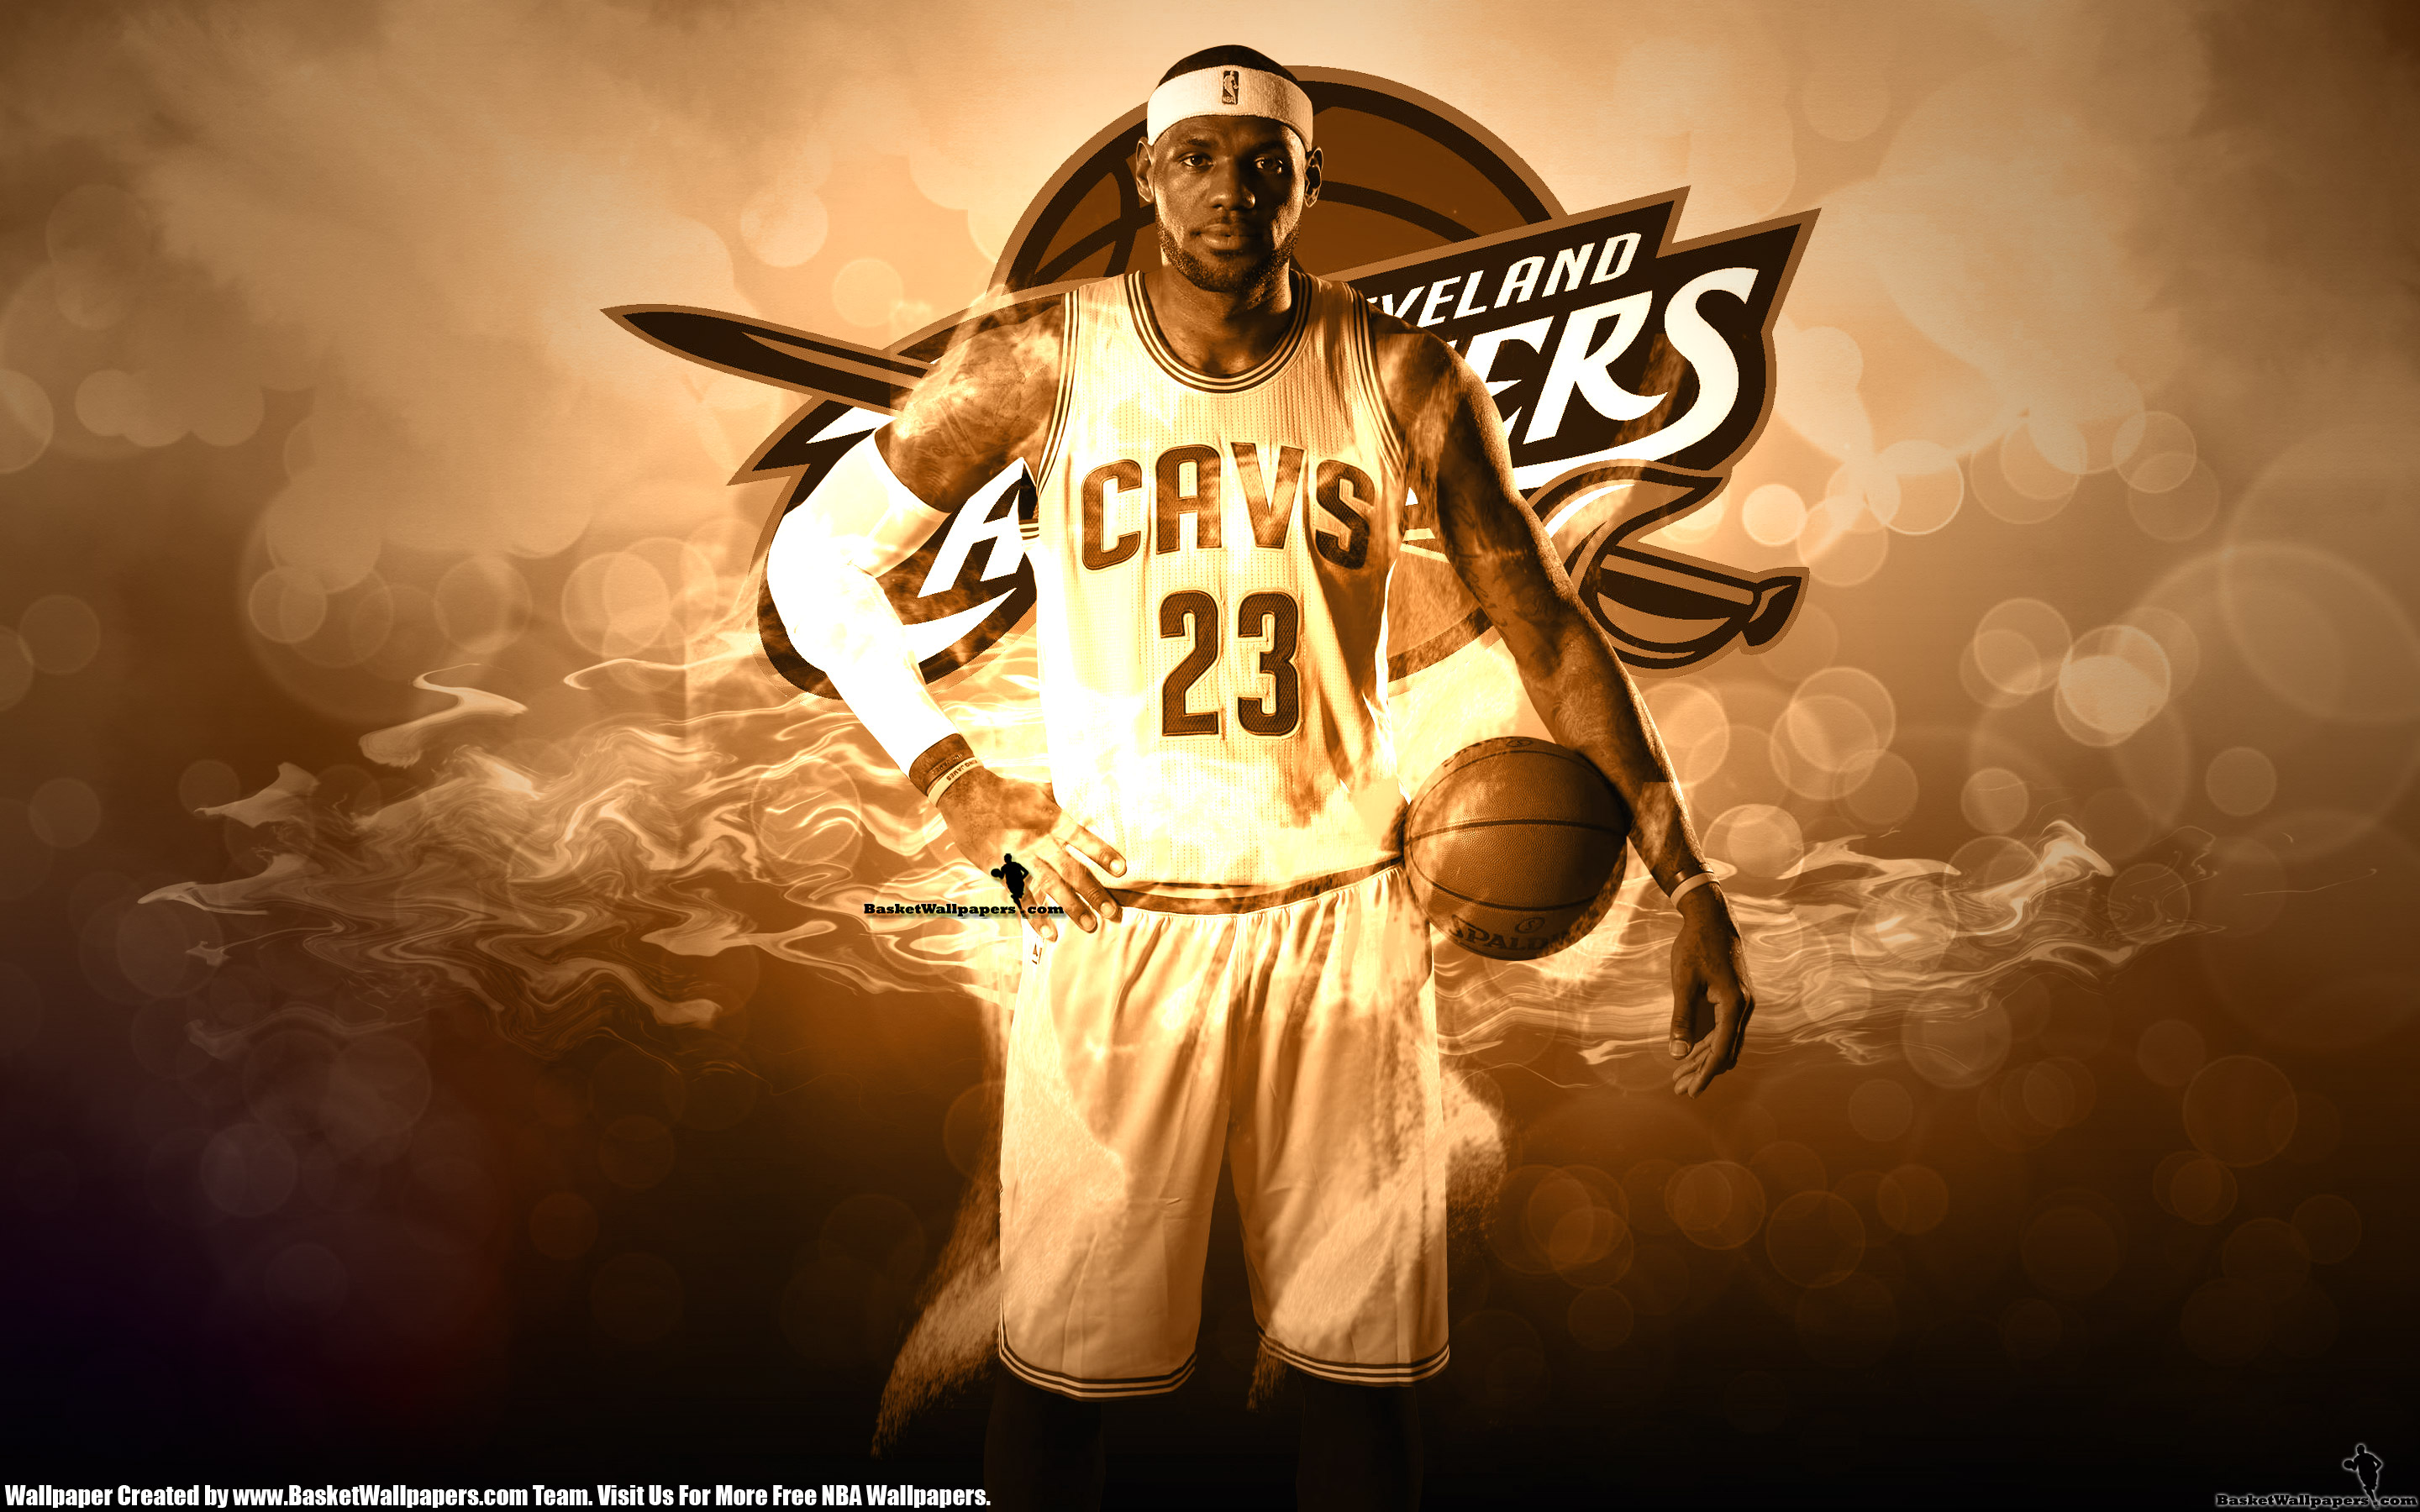 Lebron James Dunk Heat Wallpaper Image In Collection